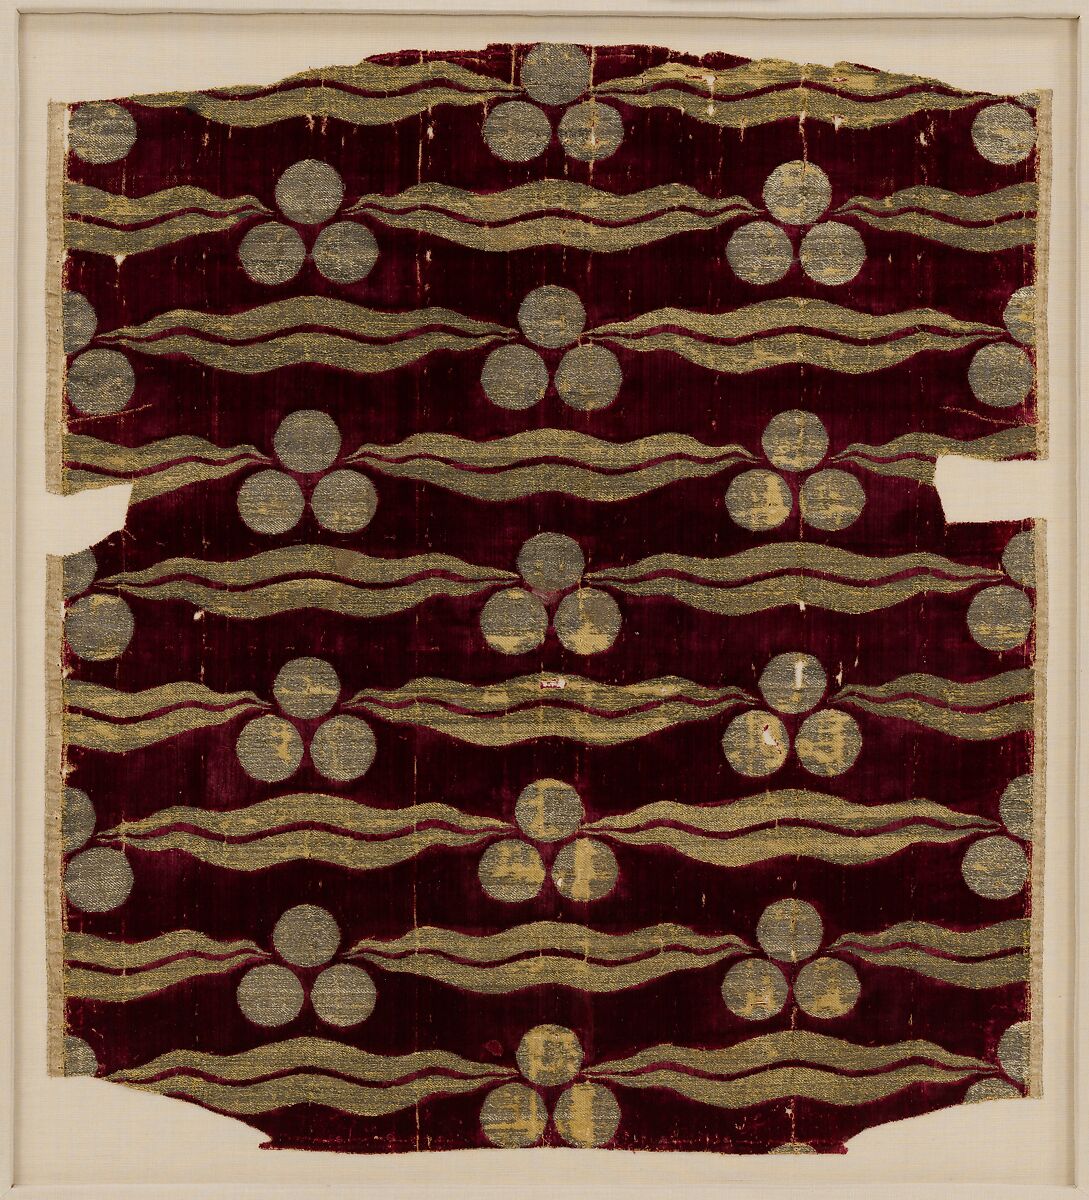 Fragmentary Silk Velvet with Repeating Tiger-stripe and 'Chintamani' Design, Silk, metal wrapped thread; cut and voided velvet (çatma), brocaded 